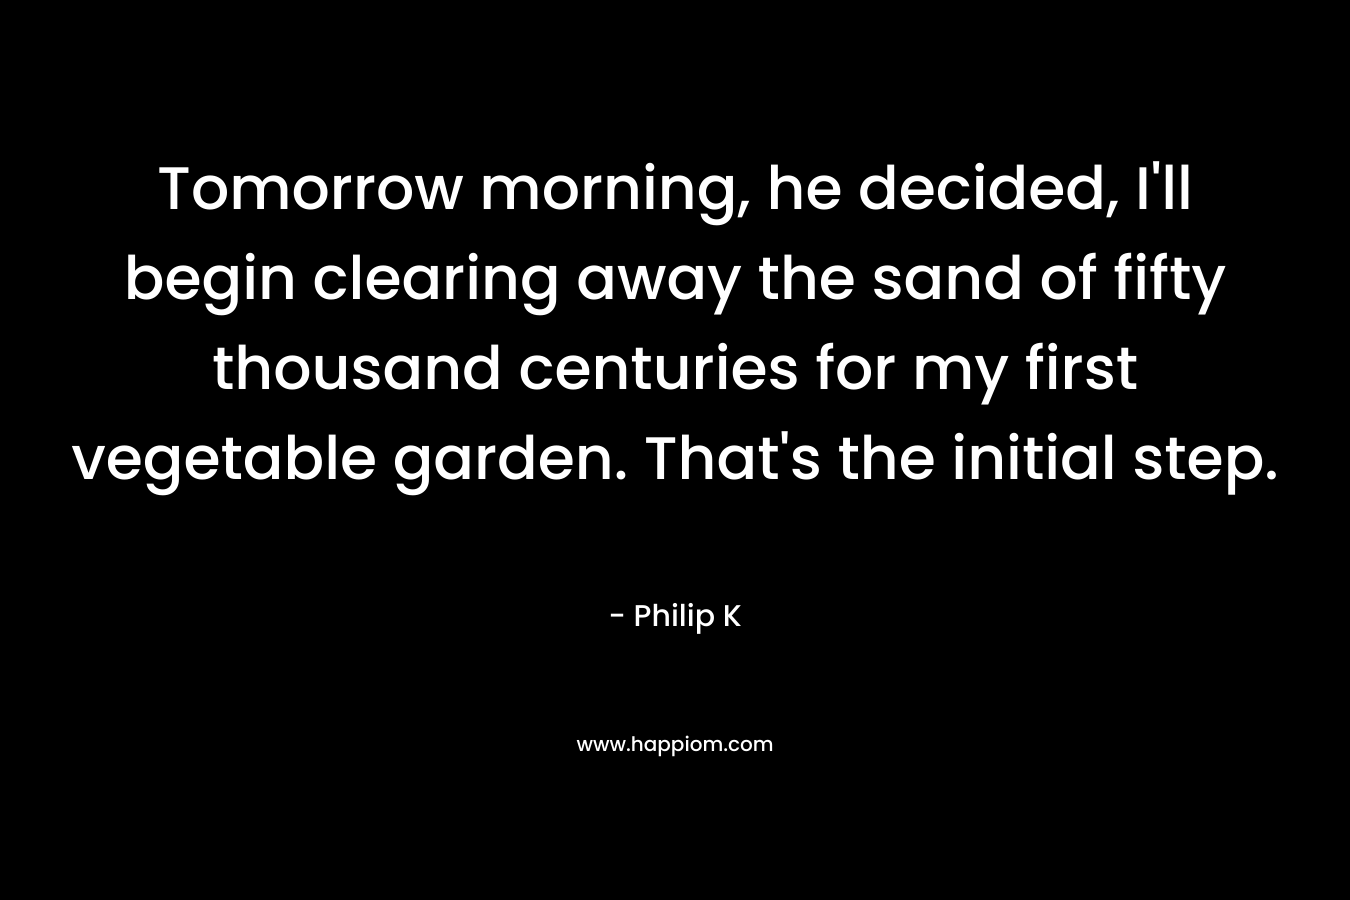 Tomorrow morning, he decided, I’ll begin clearing away the sand of fifty thousand centuries for my first vegetable garden. That’s the initial step. – Philip K